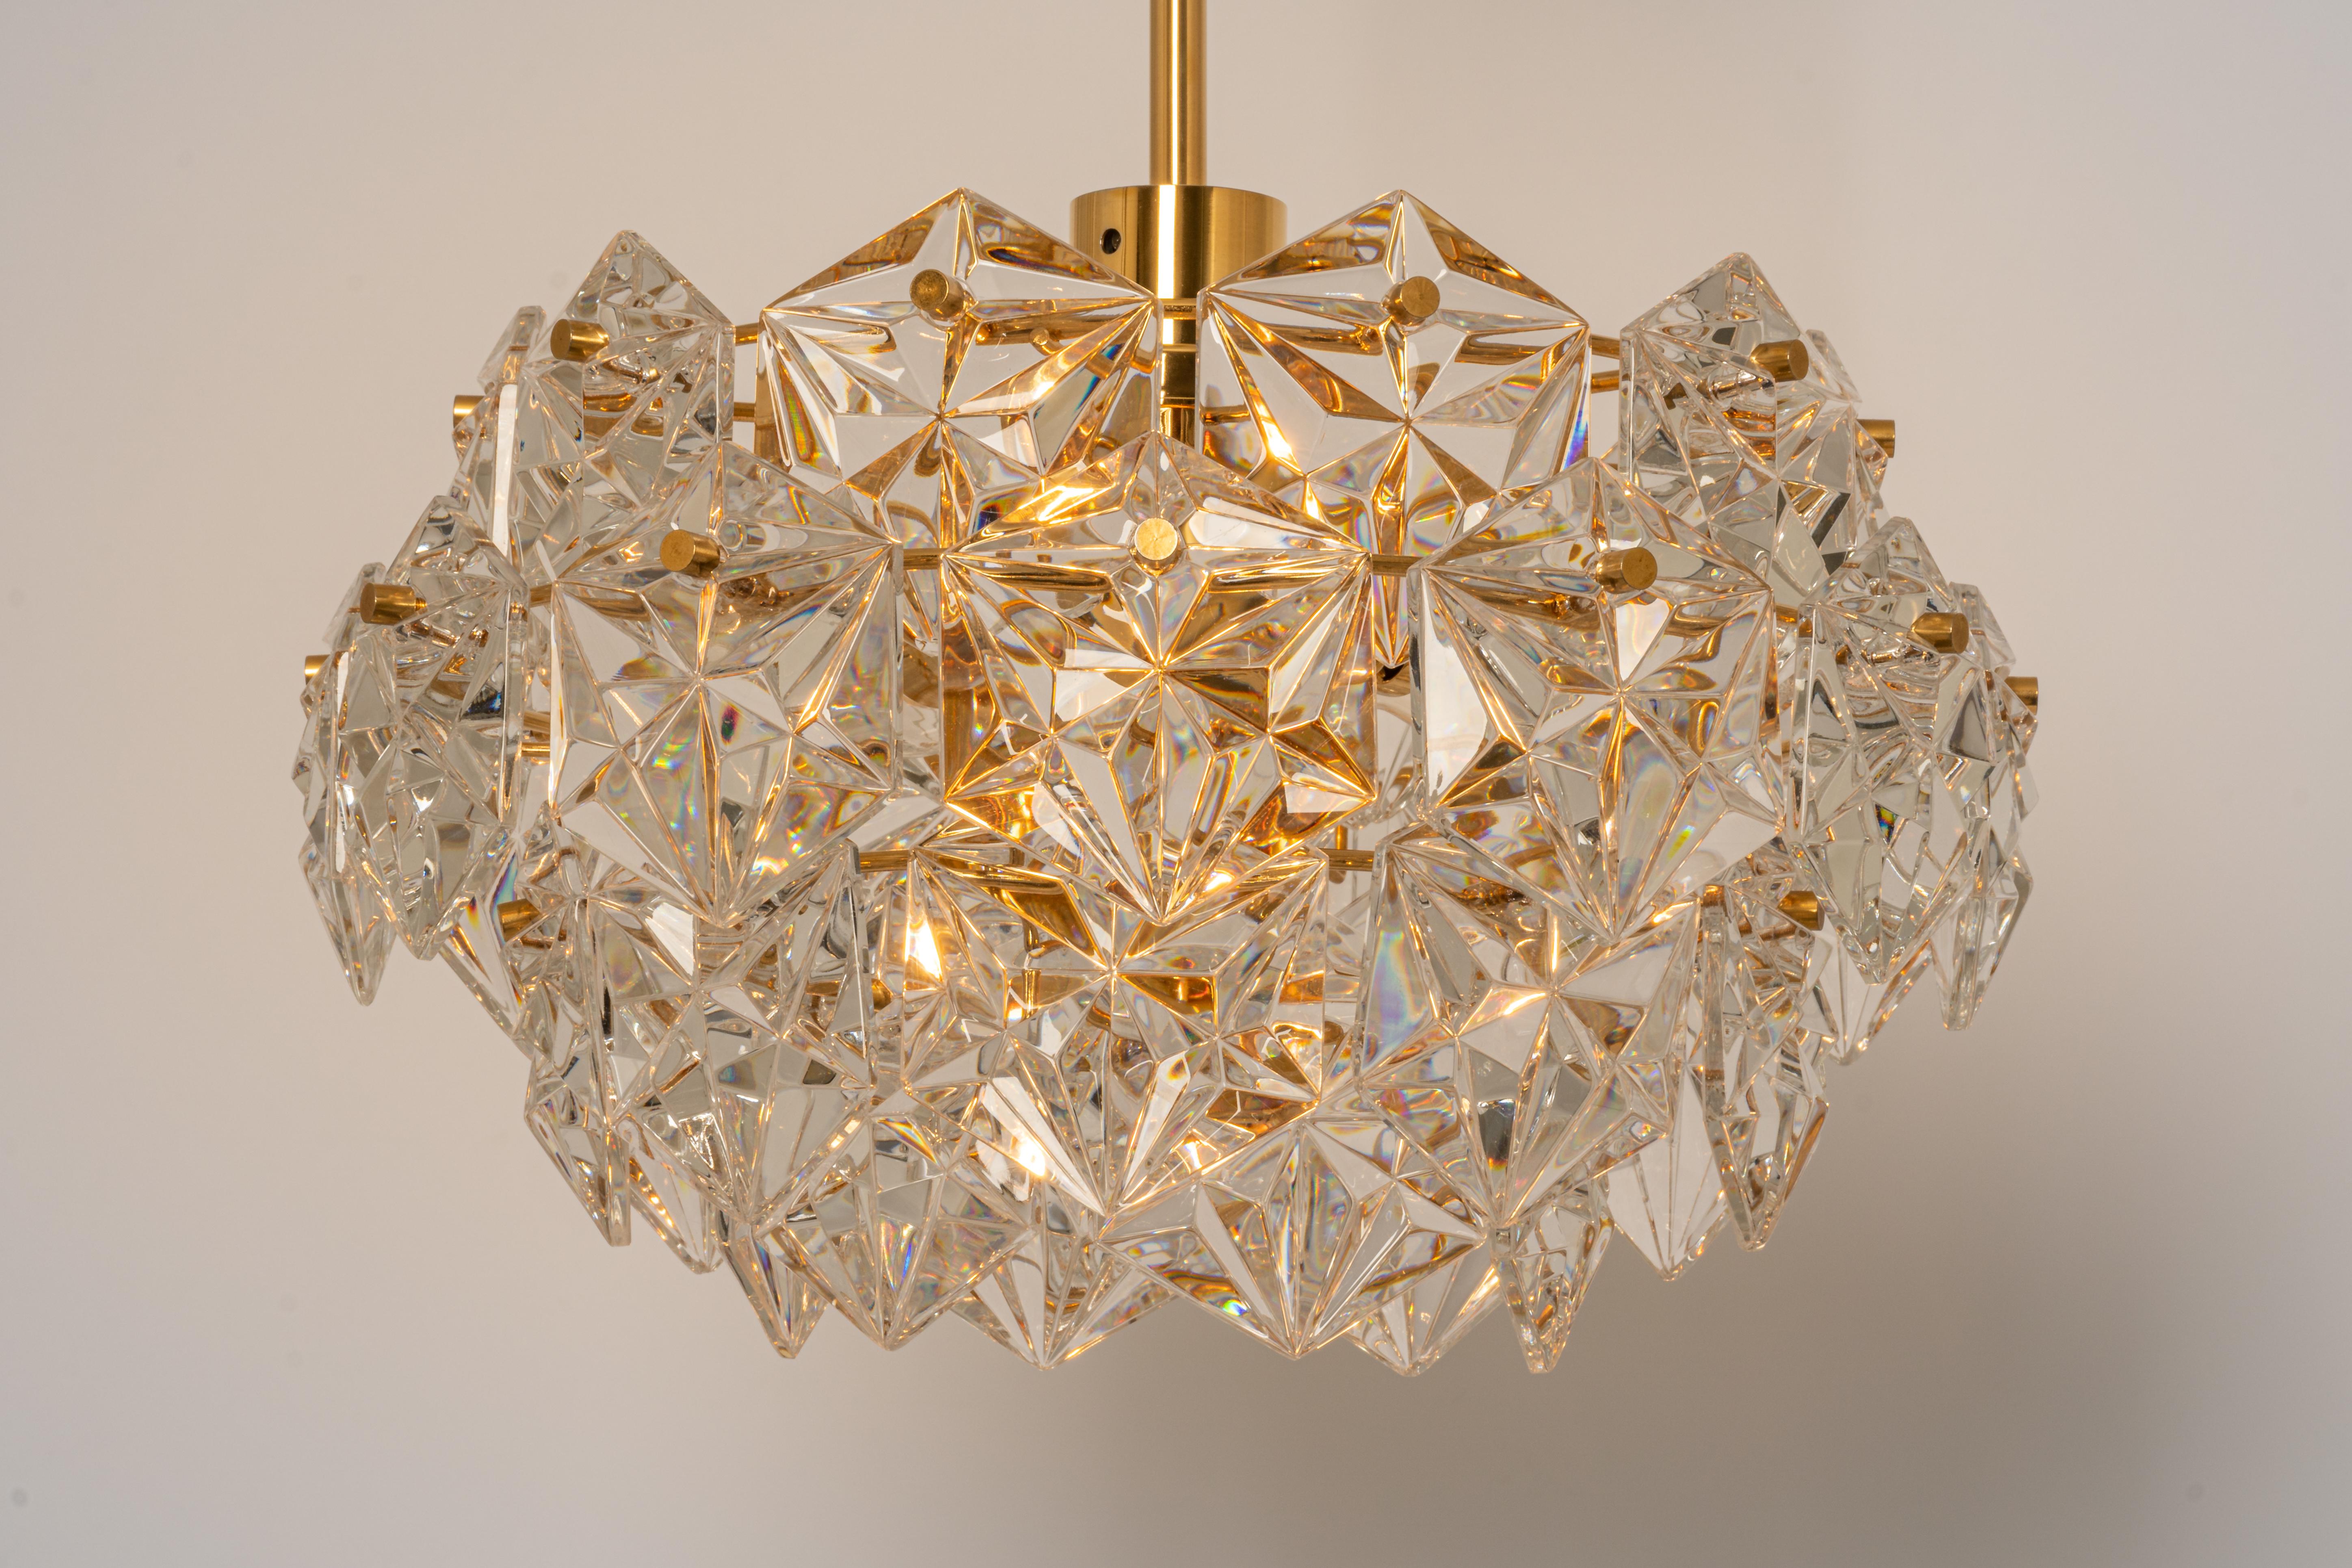 Mid-Century Modern 1 of 2 Petite Chandeliers, Brass and Crystal Glass by Kinkeldey, Germany, 1970s For Sale